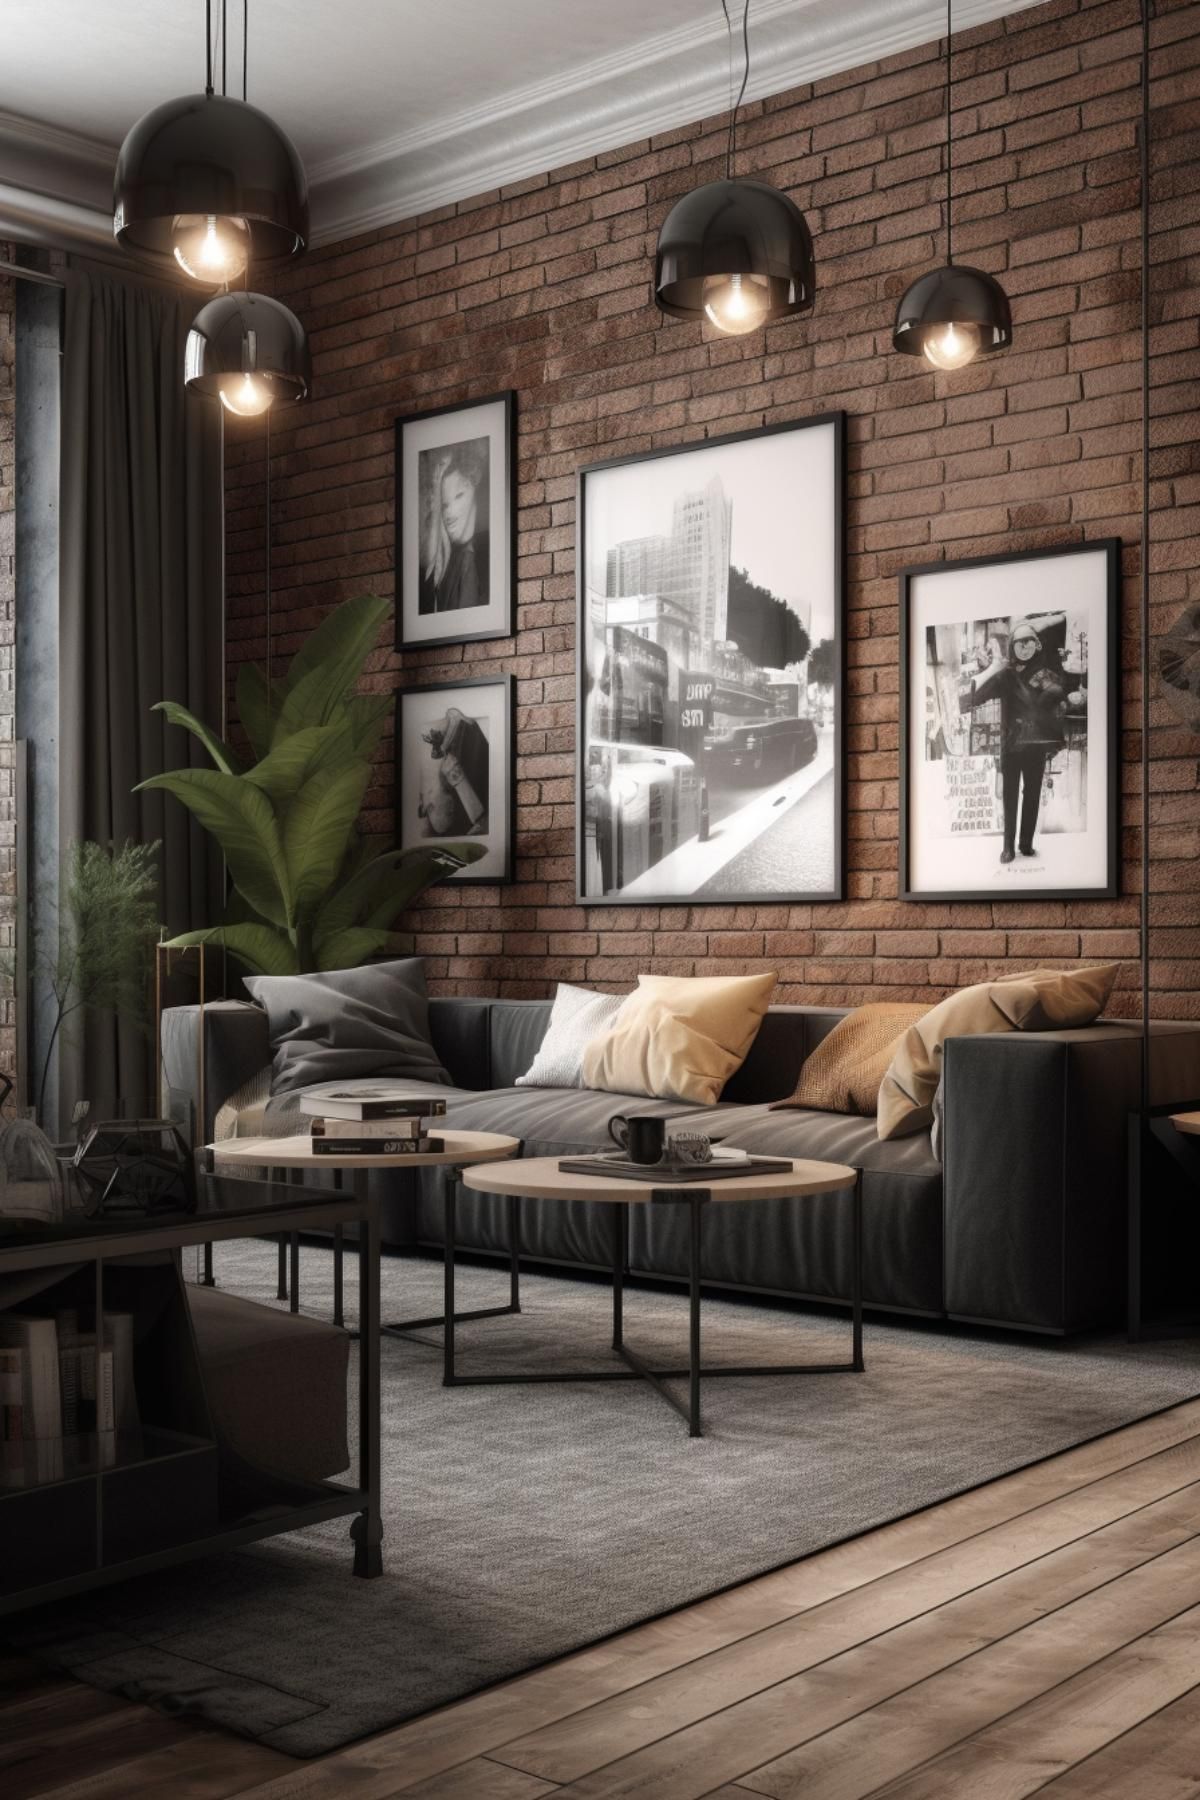 Industrial Decor Must See Top Industrial Decor Ideas for Your Home